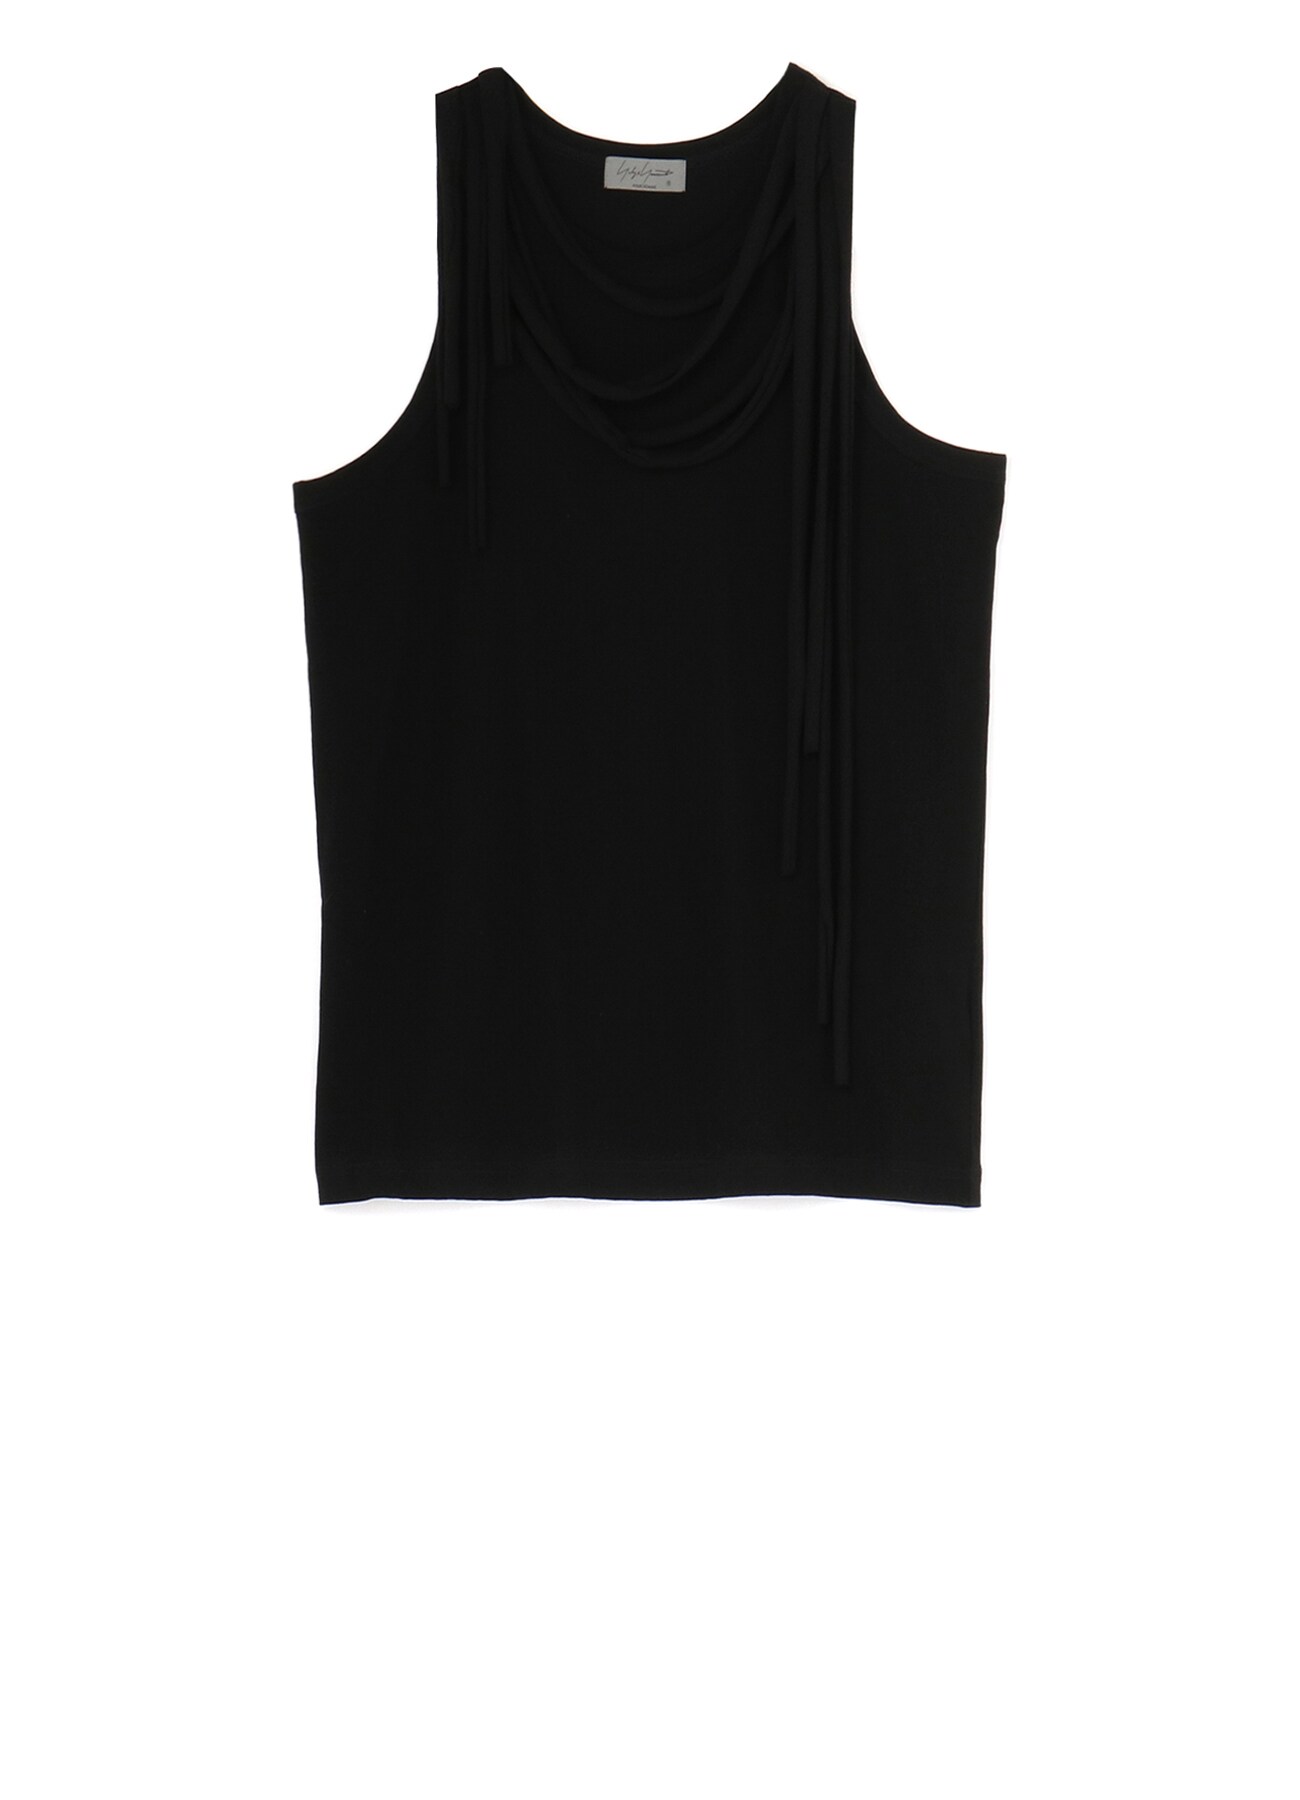 30/- COMBED YARN PS STRINGS TANK TOP A